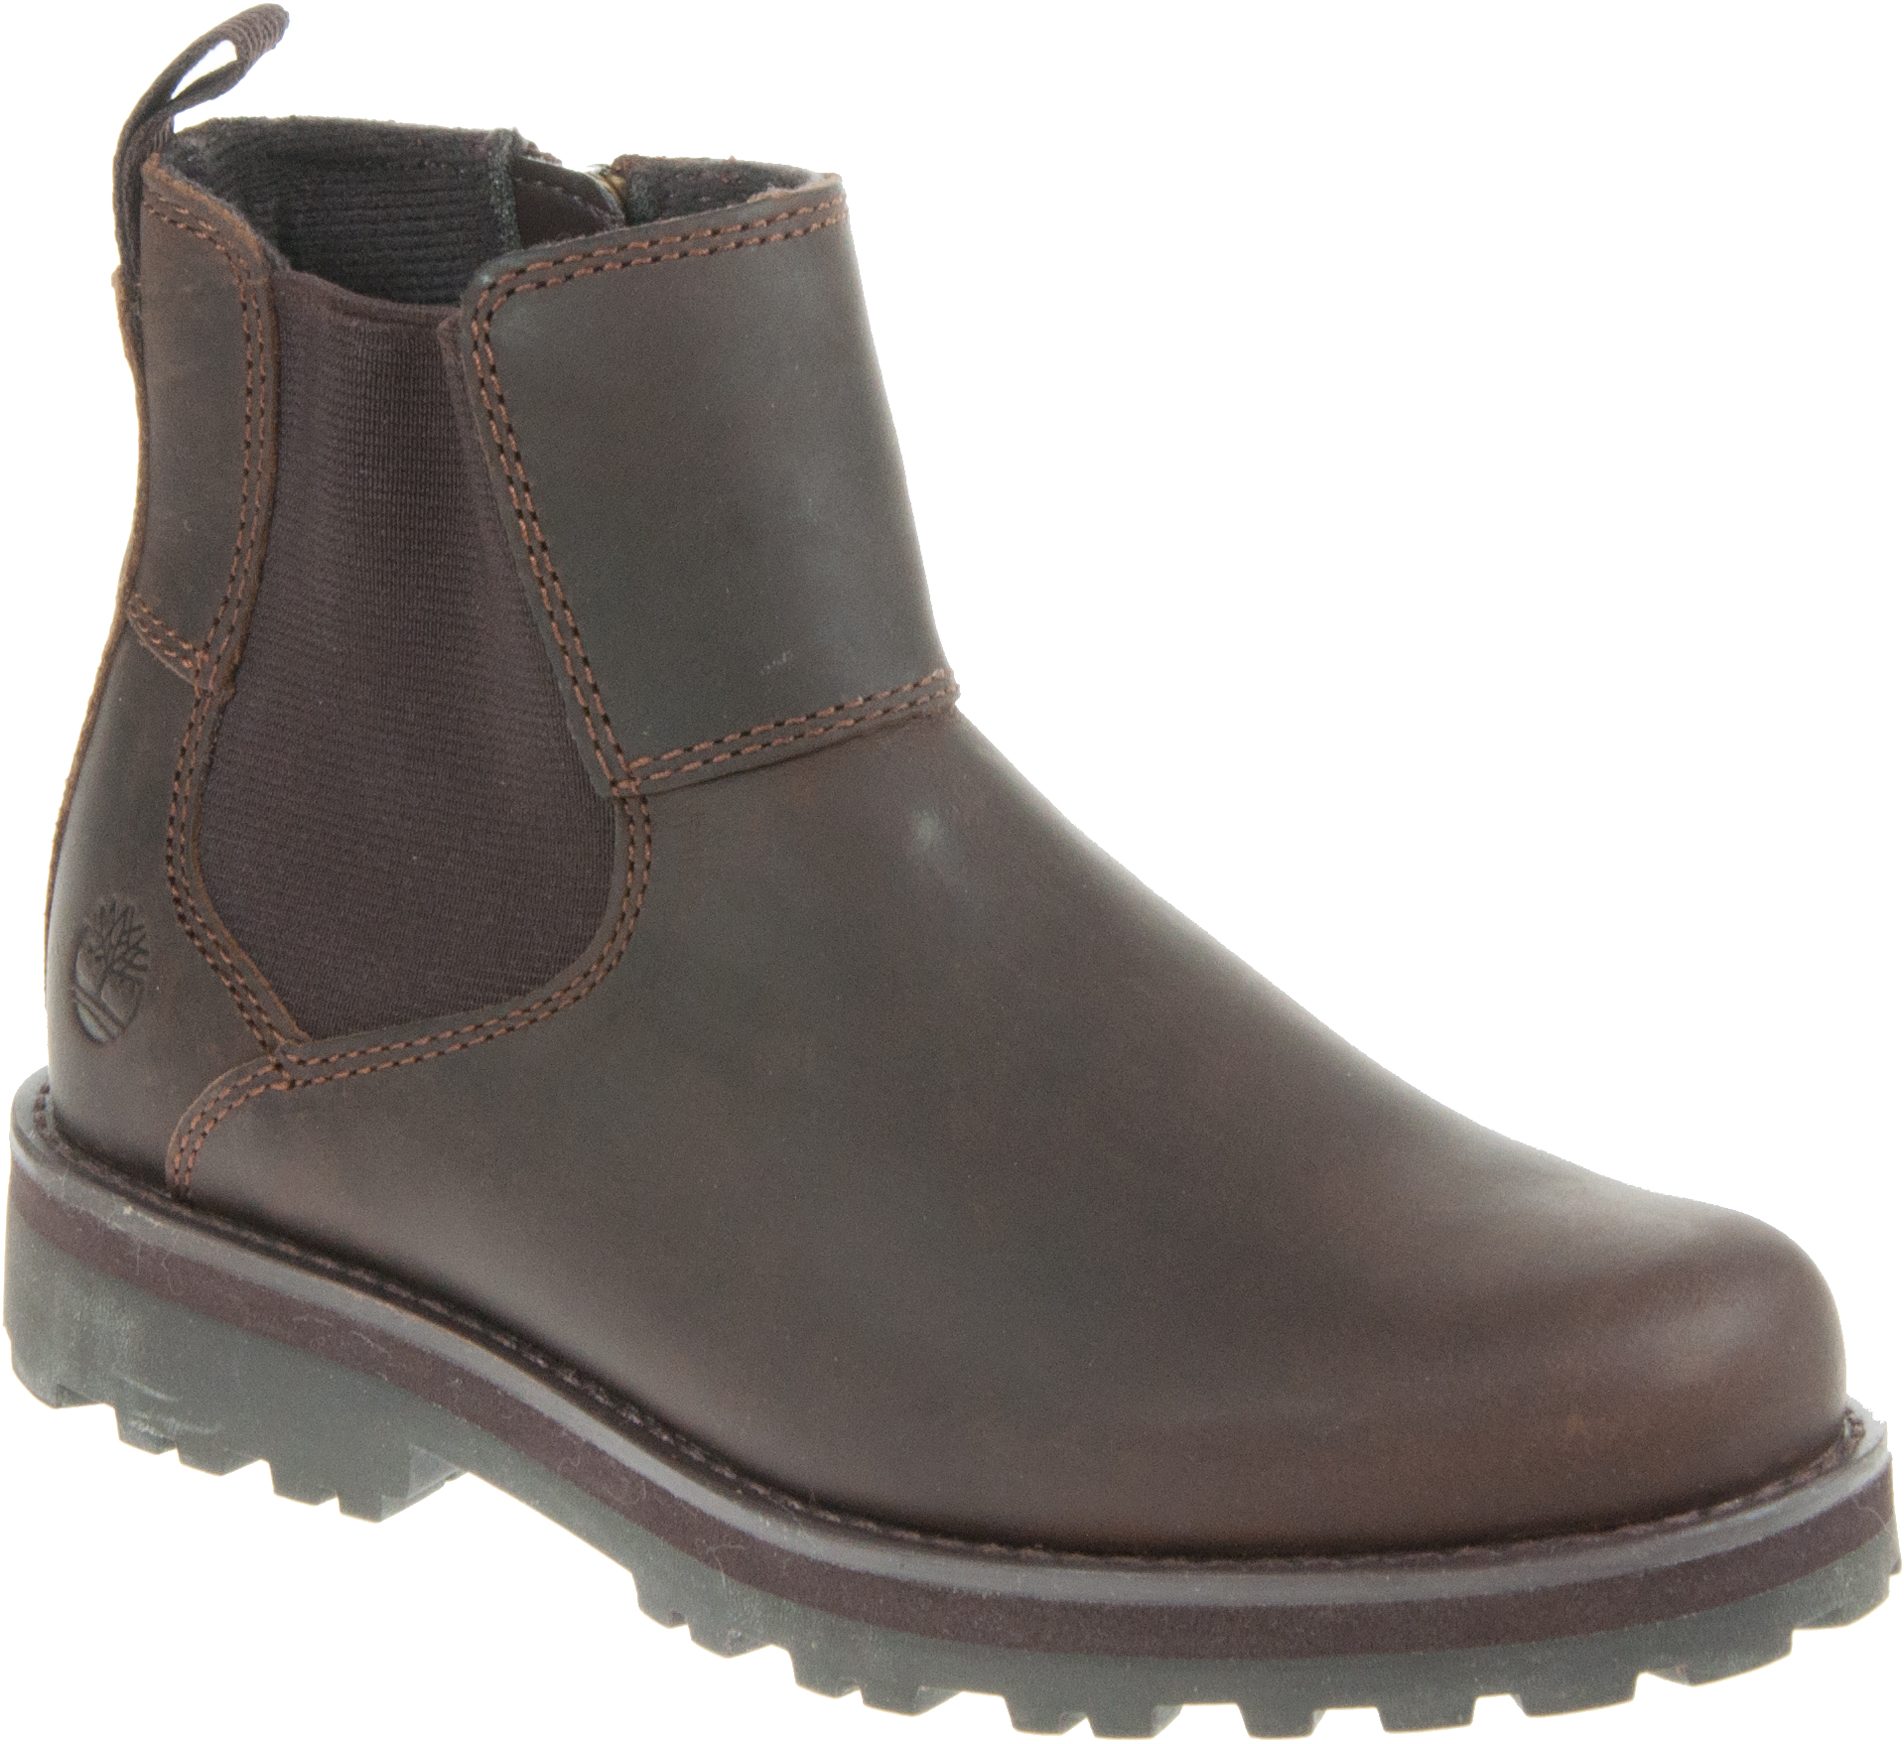 Boots Humphries - Boys A25GK Kid 931 Courma Chelsea Brown Shoes Timberland - Youths Dark